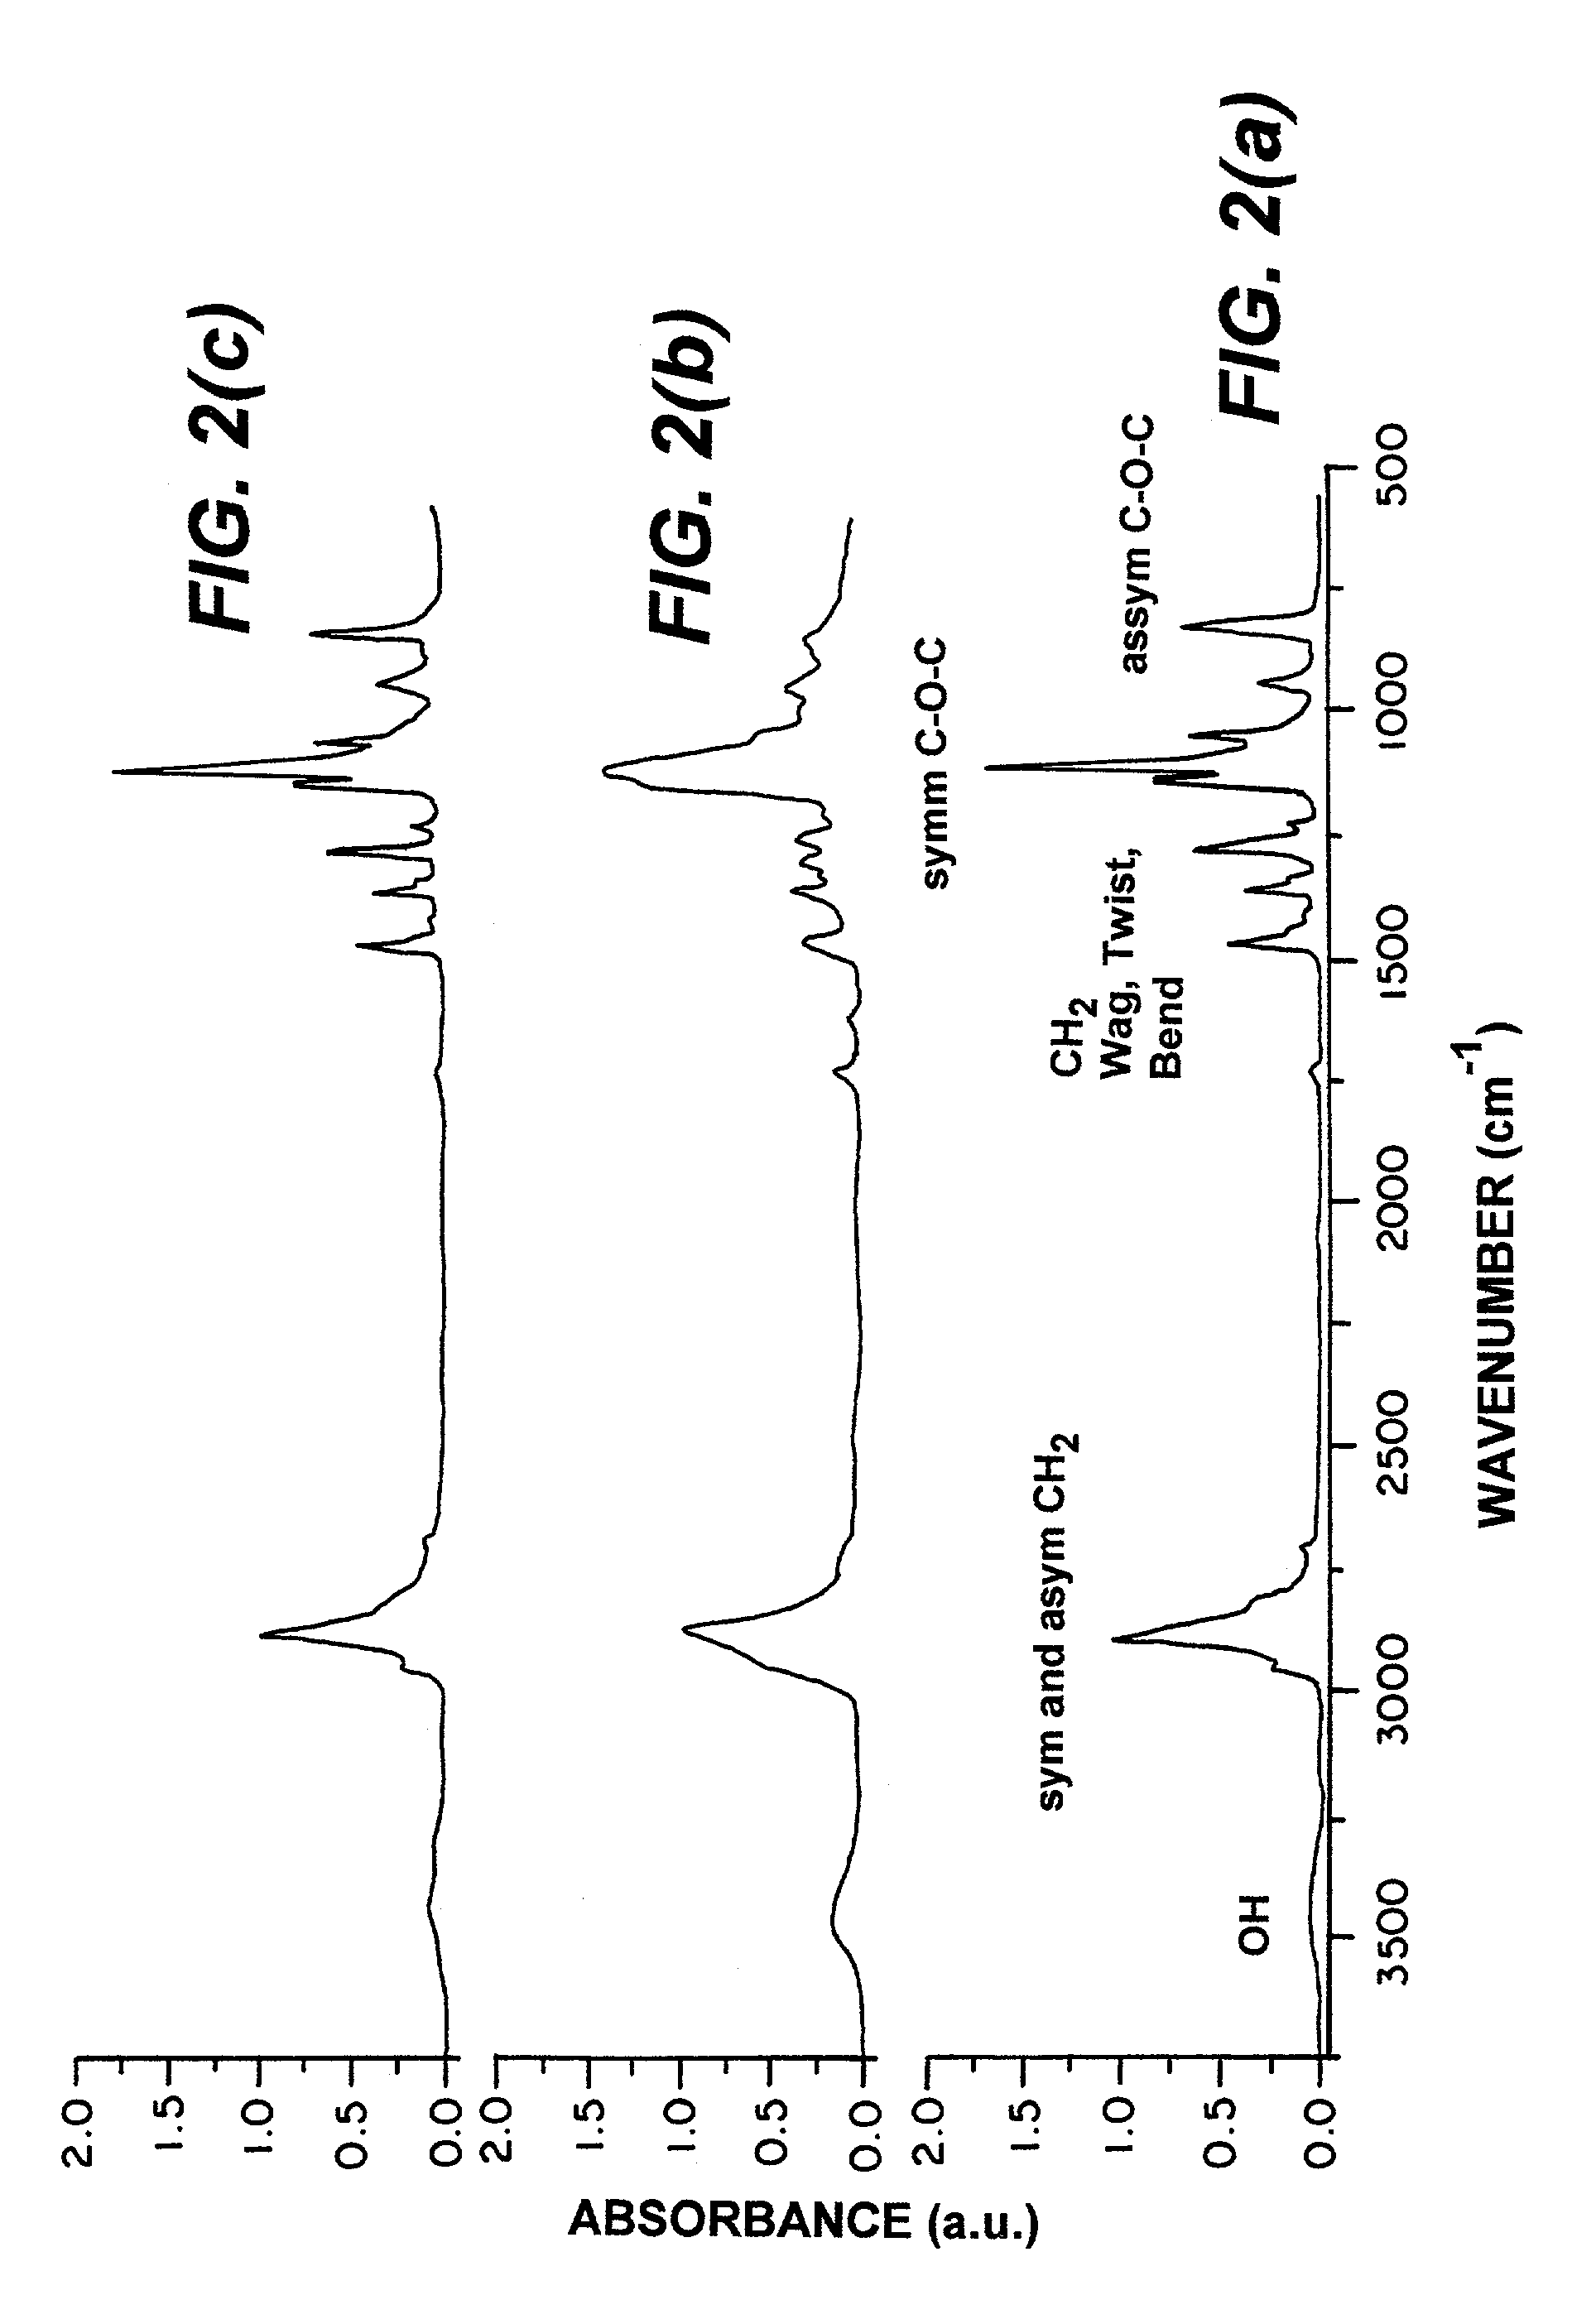 Deposition of thin films using an infrared laser